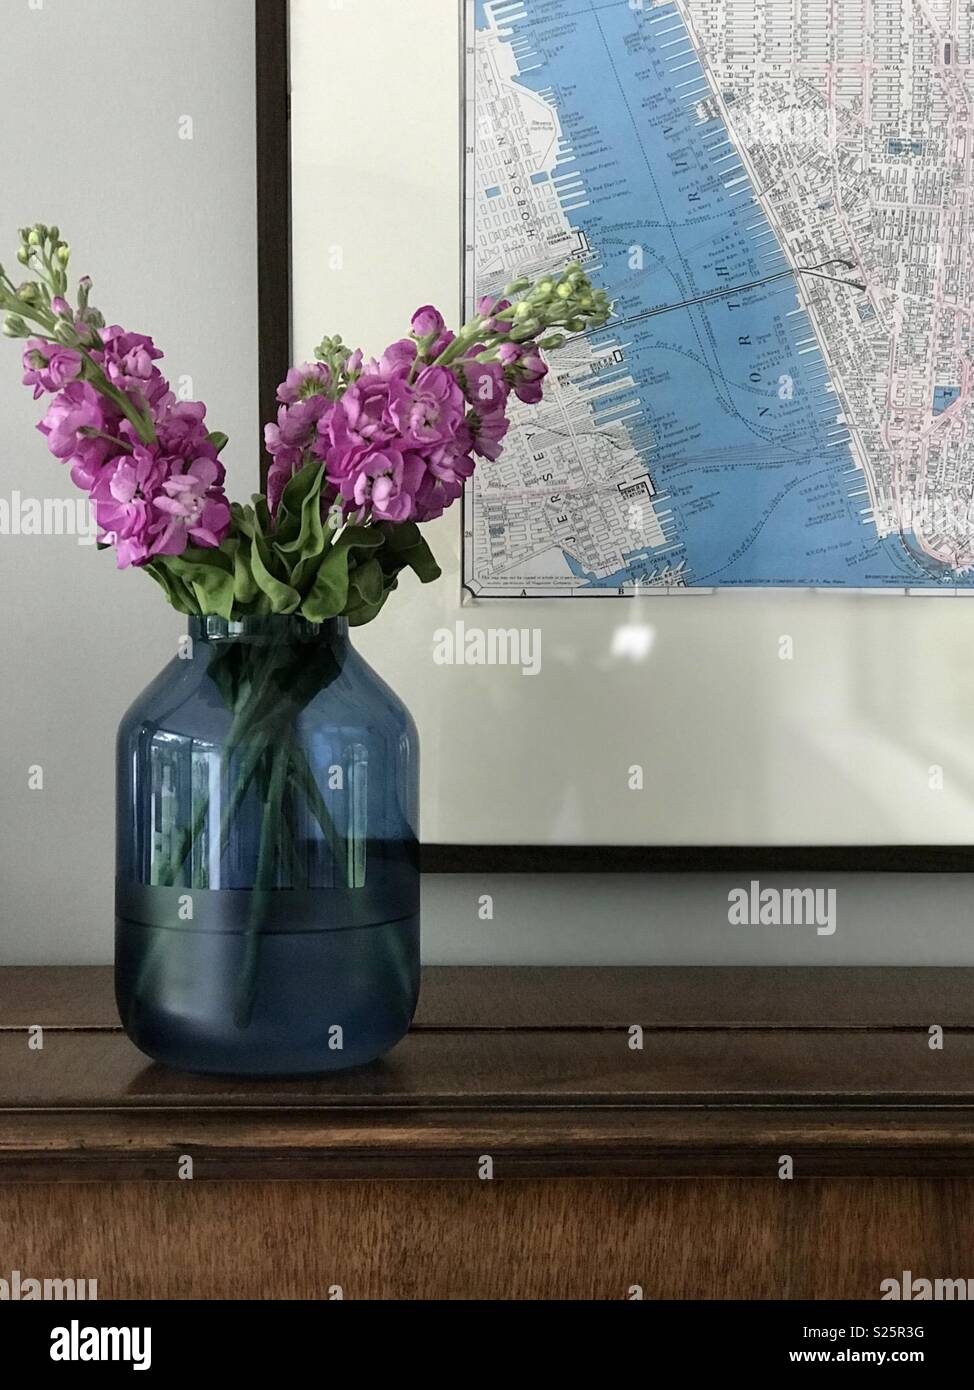 Blue vase, pink flowers and vintage map in interior vignette Stock Photo